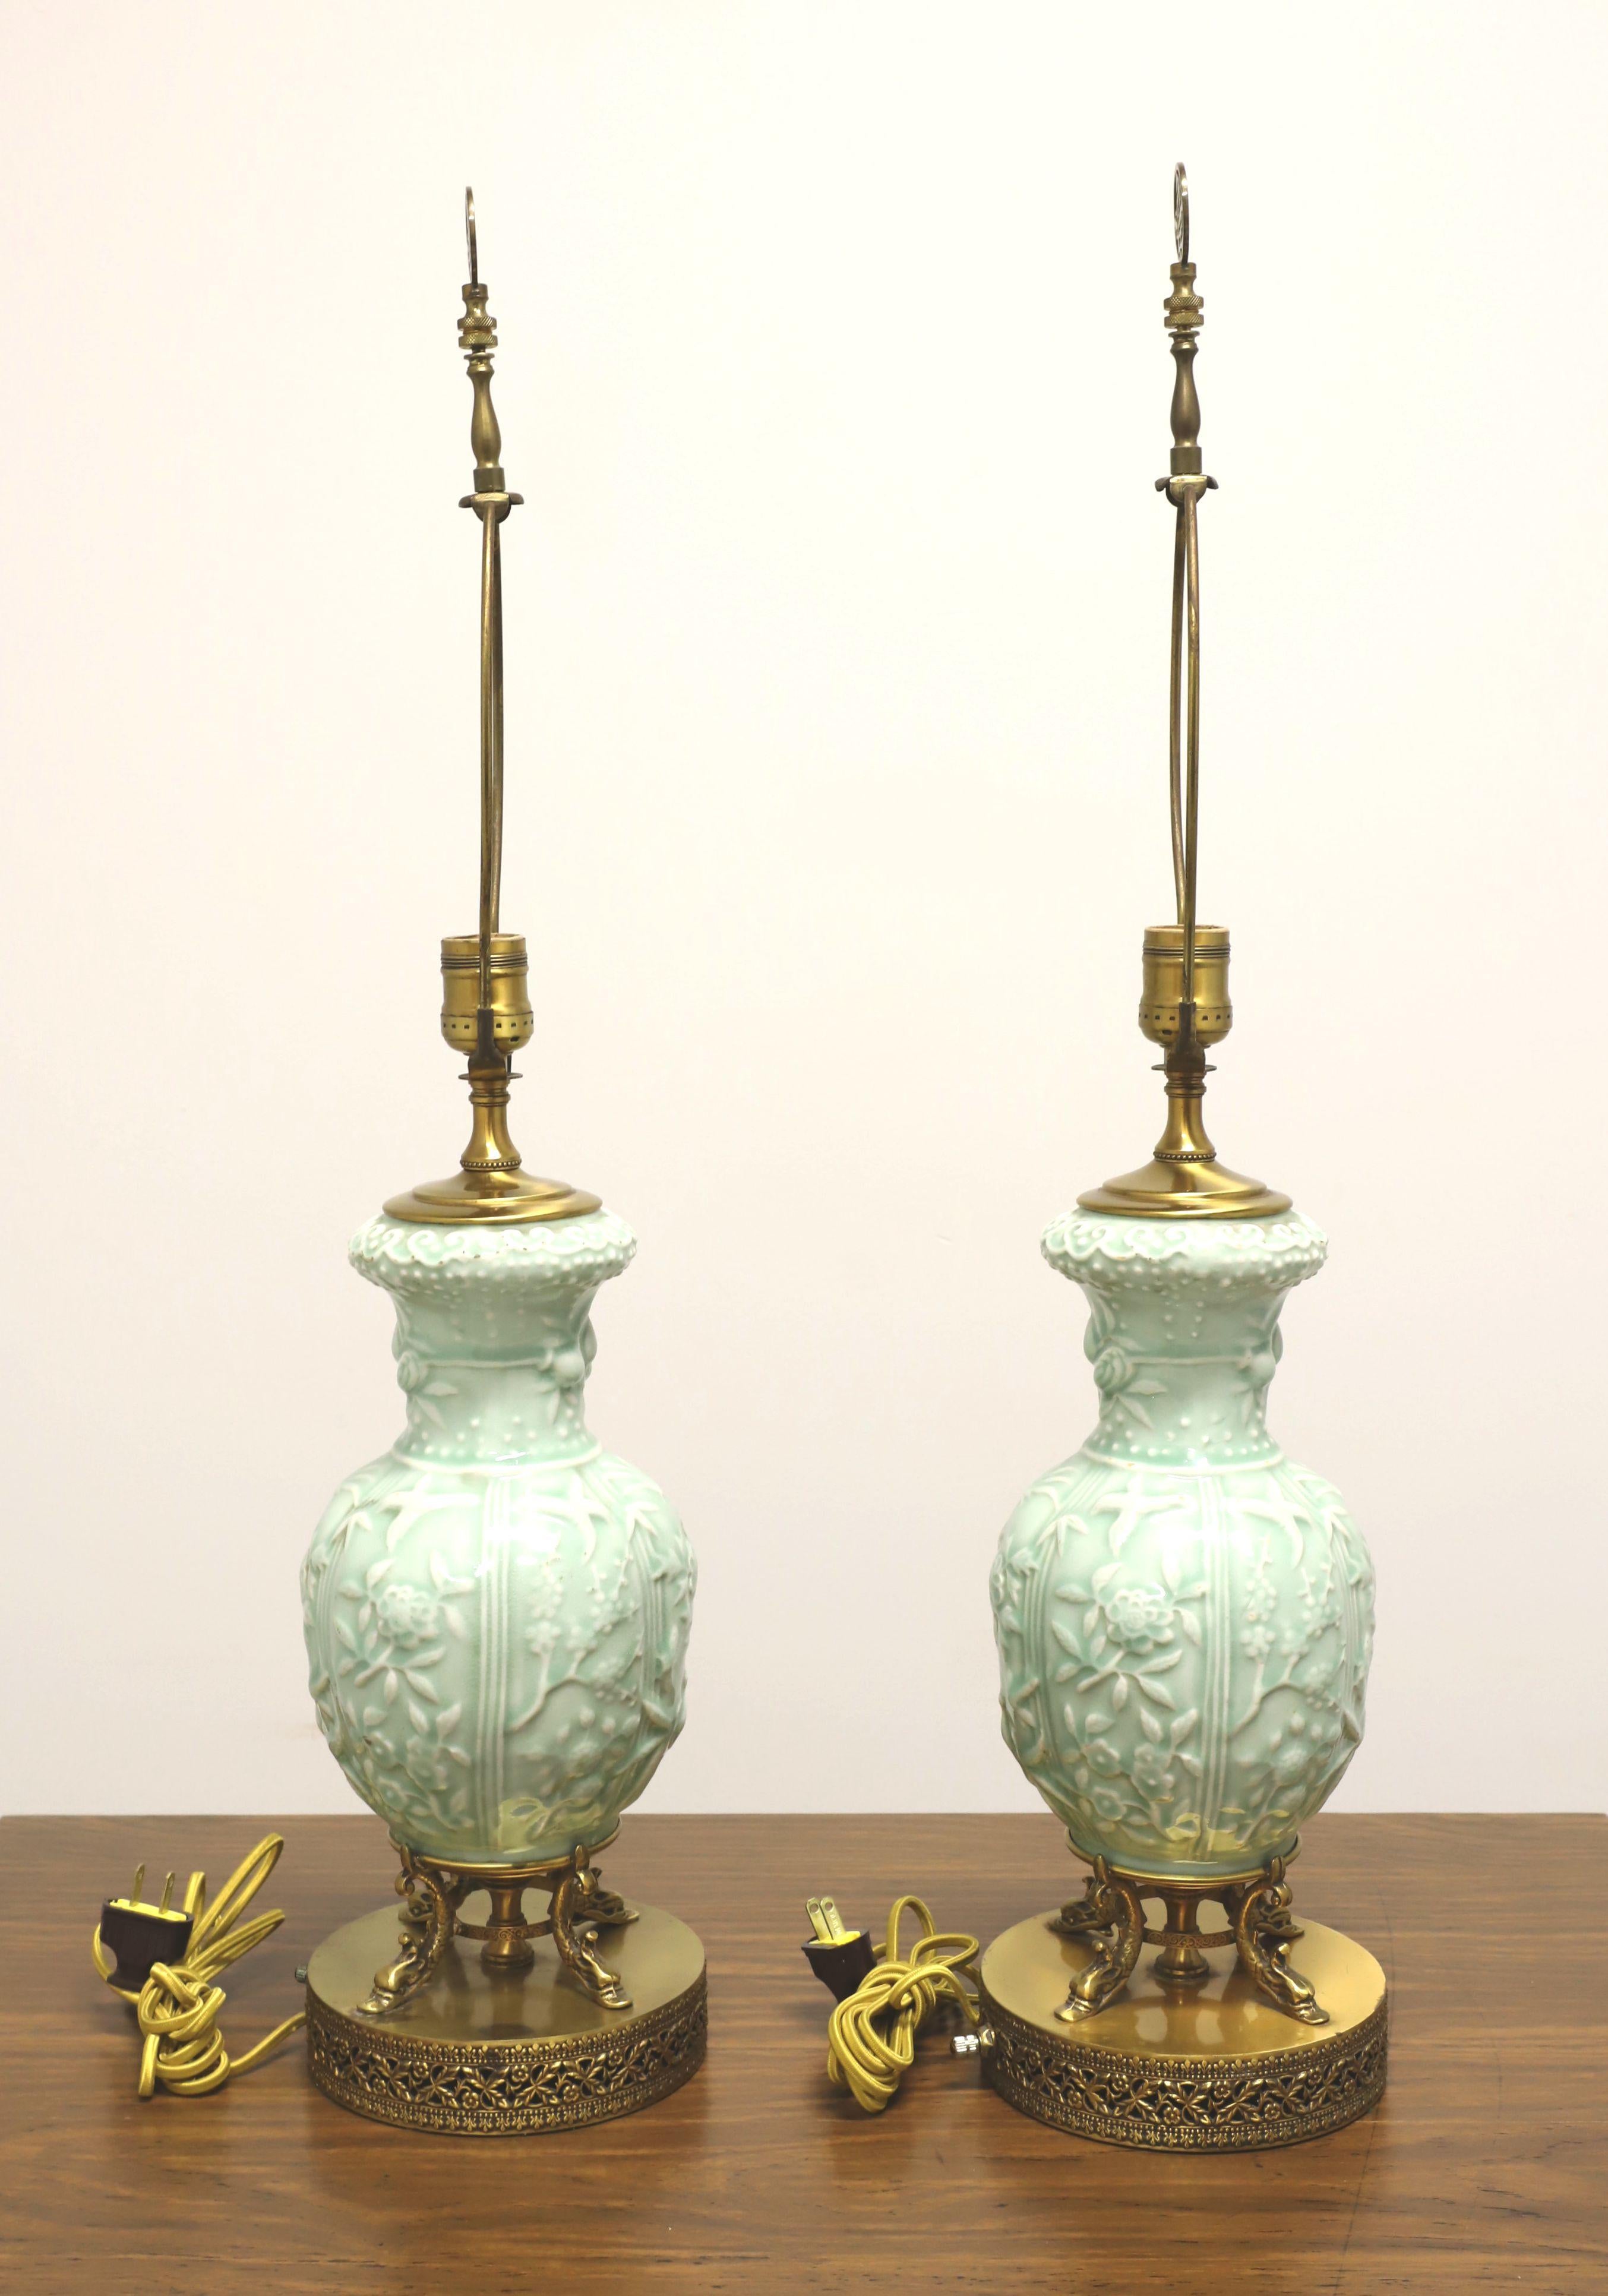 A pair of Asian style table lamps, unbranded. Made of porcelain in an urn style, celadon glaze of blue/green/white color, raised foliate Chinoiserie pattern, and on four decorative brass dolphins atop a round filigree base. Has removable metal harps